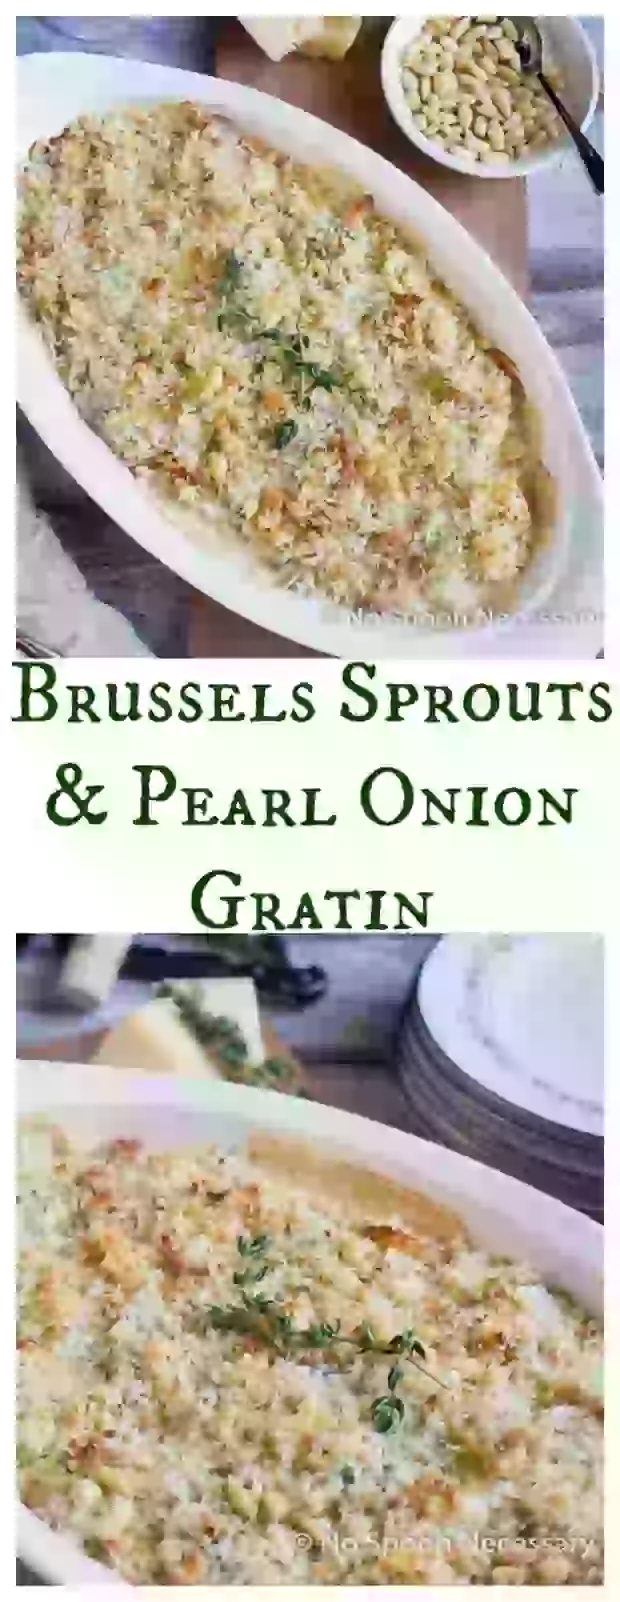 Brussels Sprouts & Pearl Onion Gratin